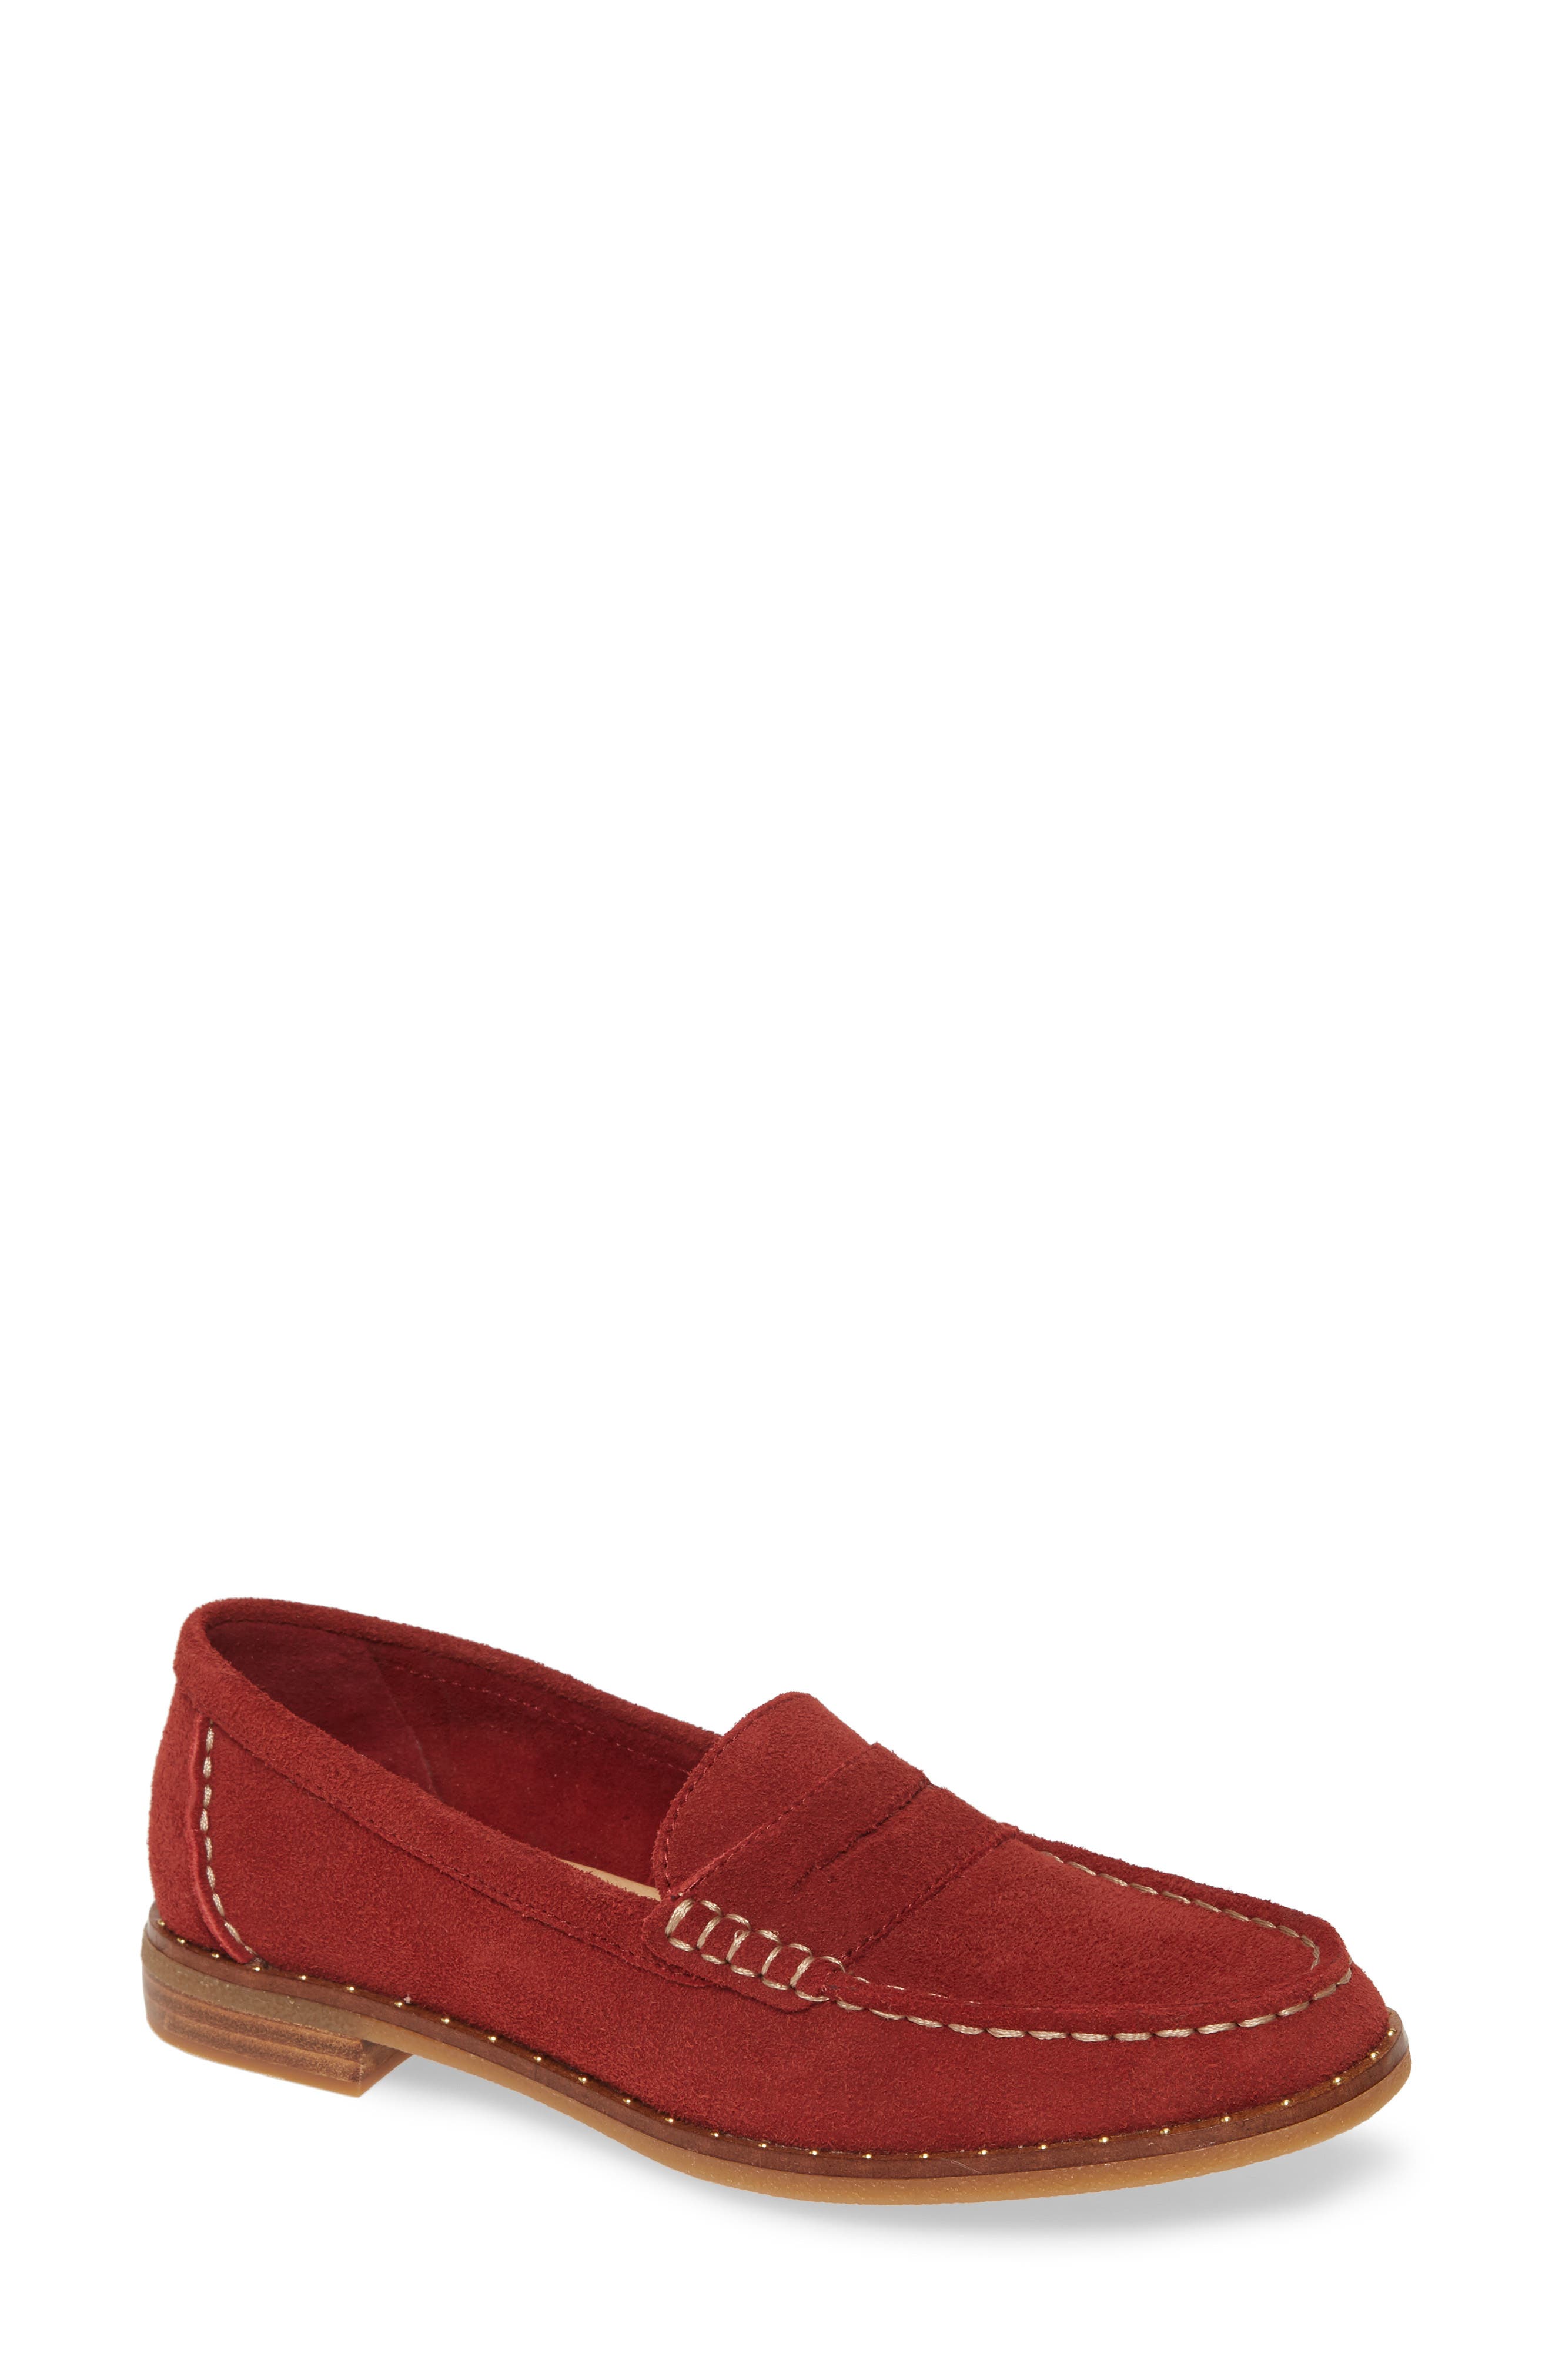 sperry seaport buckle loafer